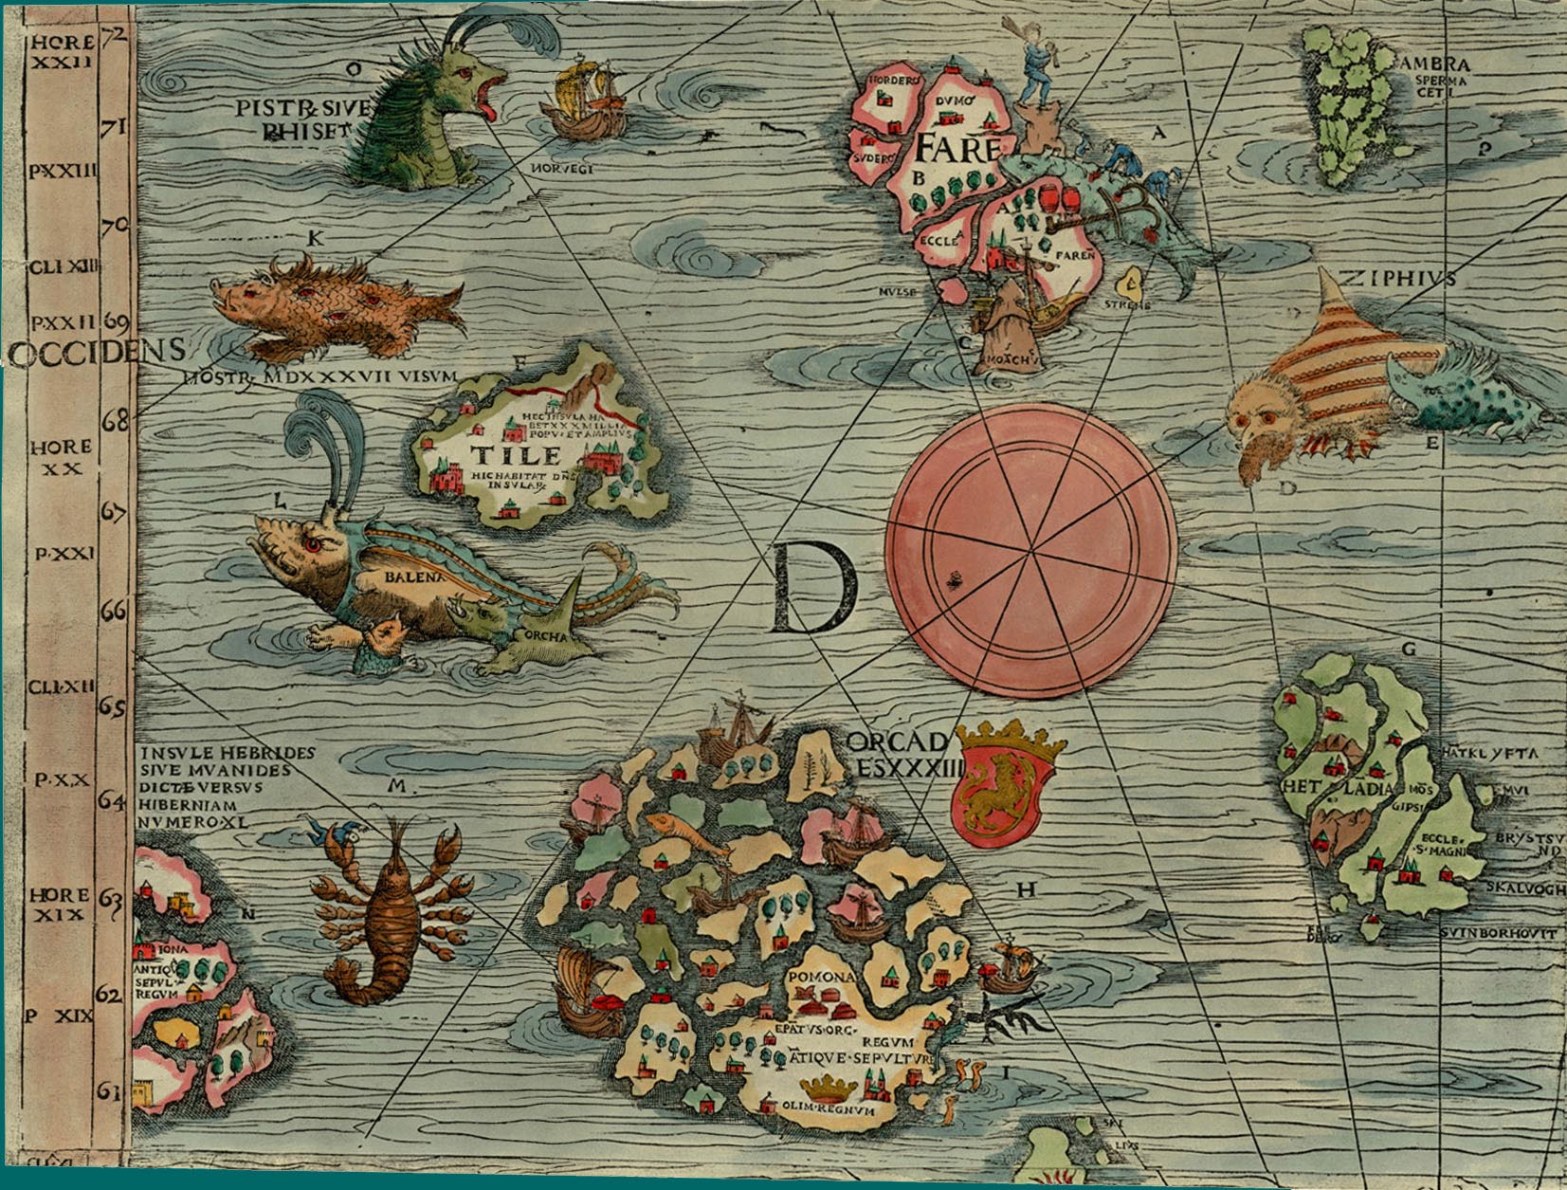 Thule as Tile on the Carta Marina of 1539 by Olaus Magnus, where it is shown located to the northwest of the Orkney islands, with a "monster, seen in 1537", a whale ("balena"), and an orca nearby.